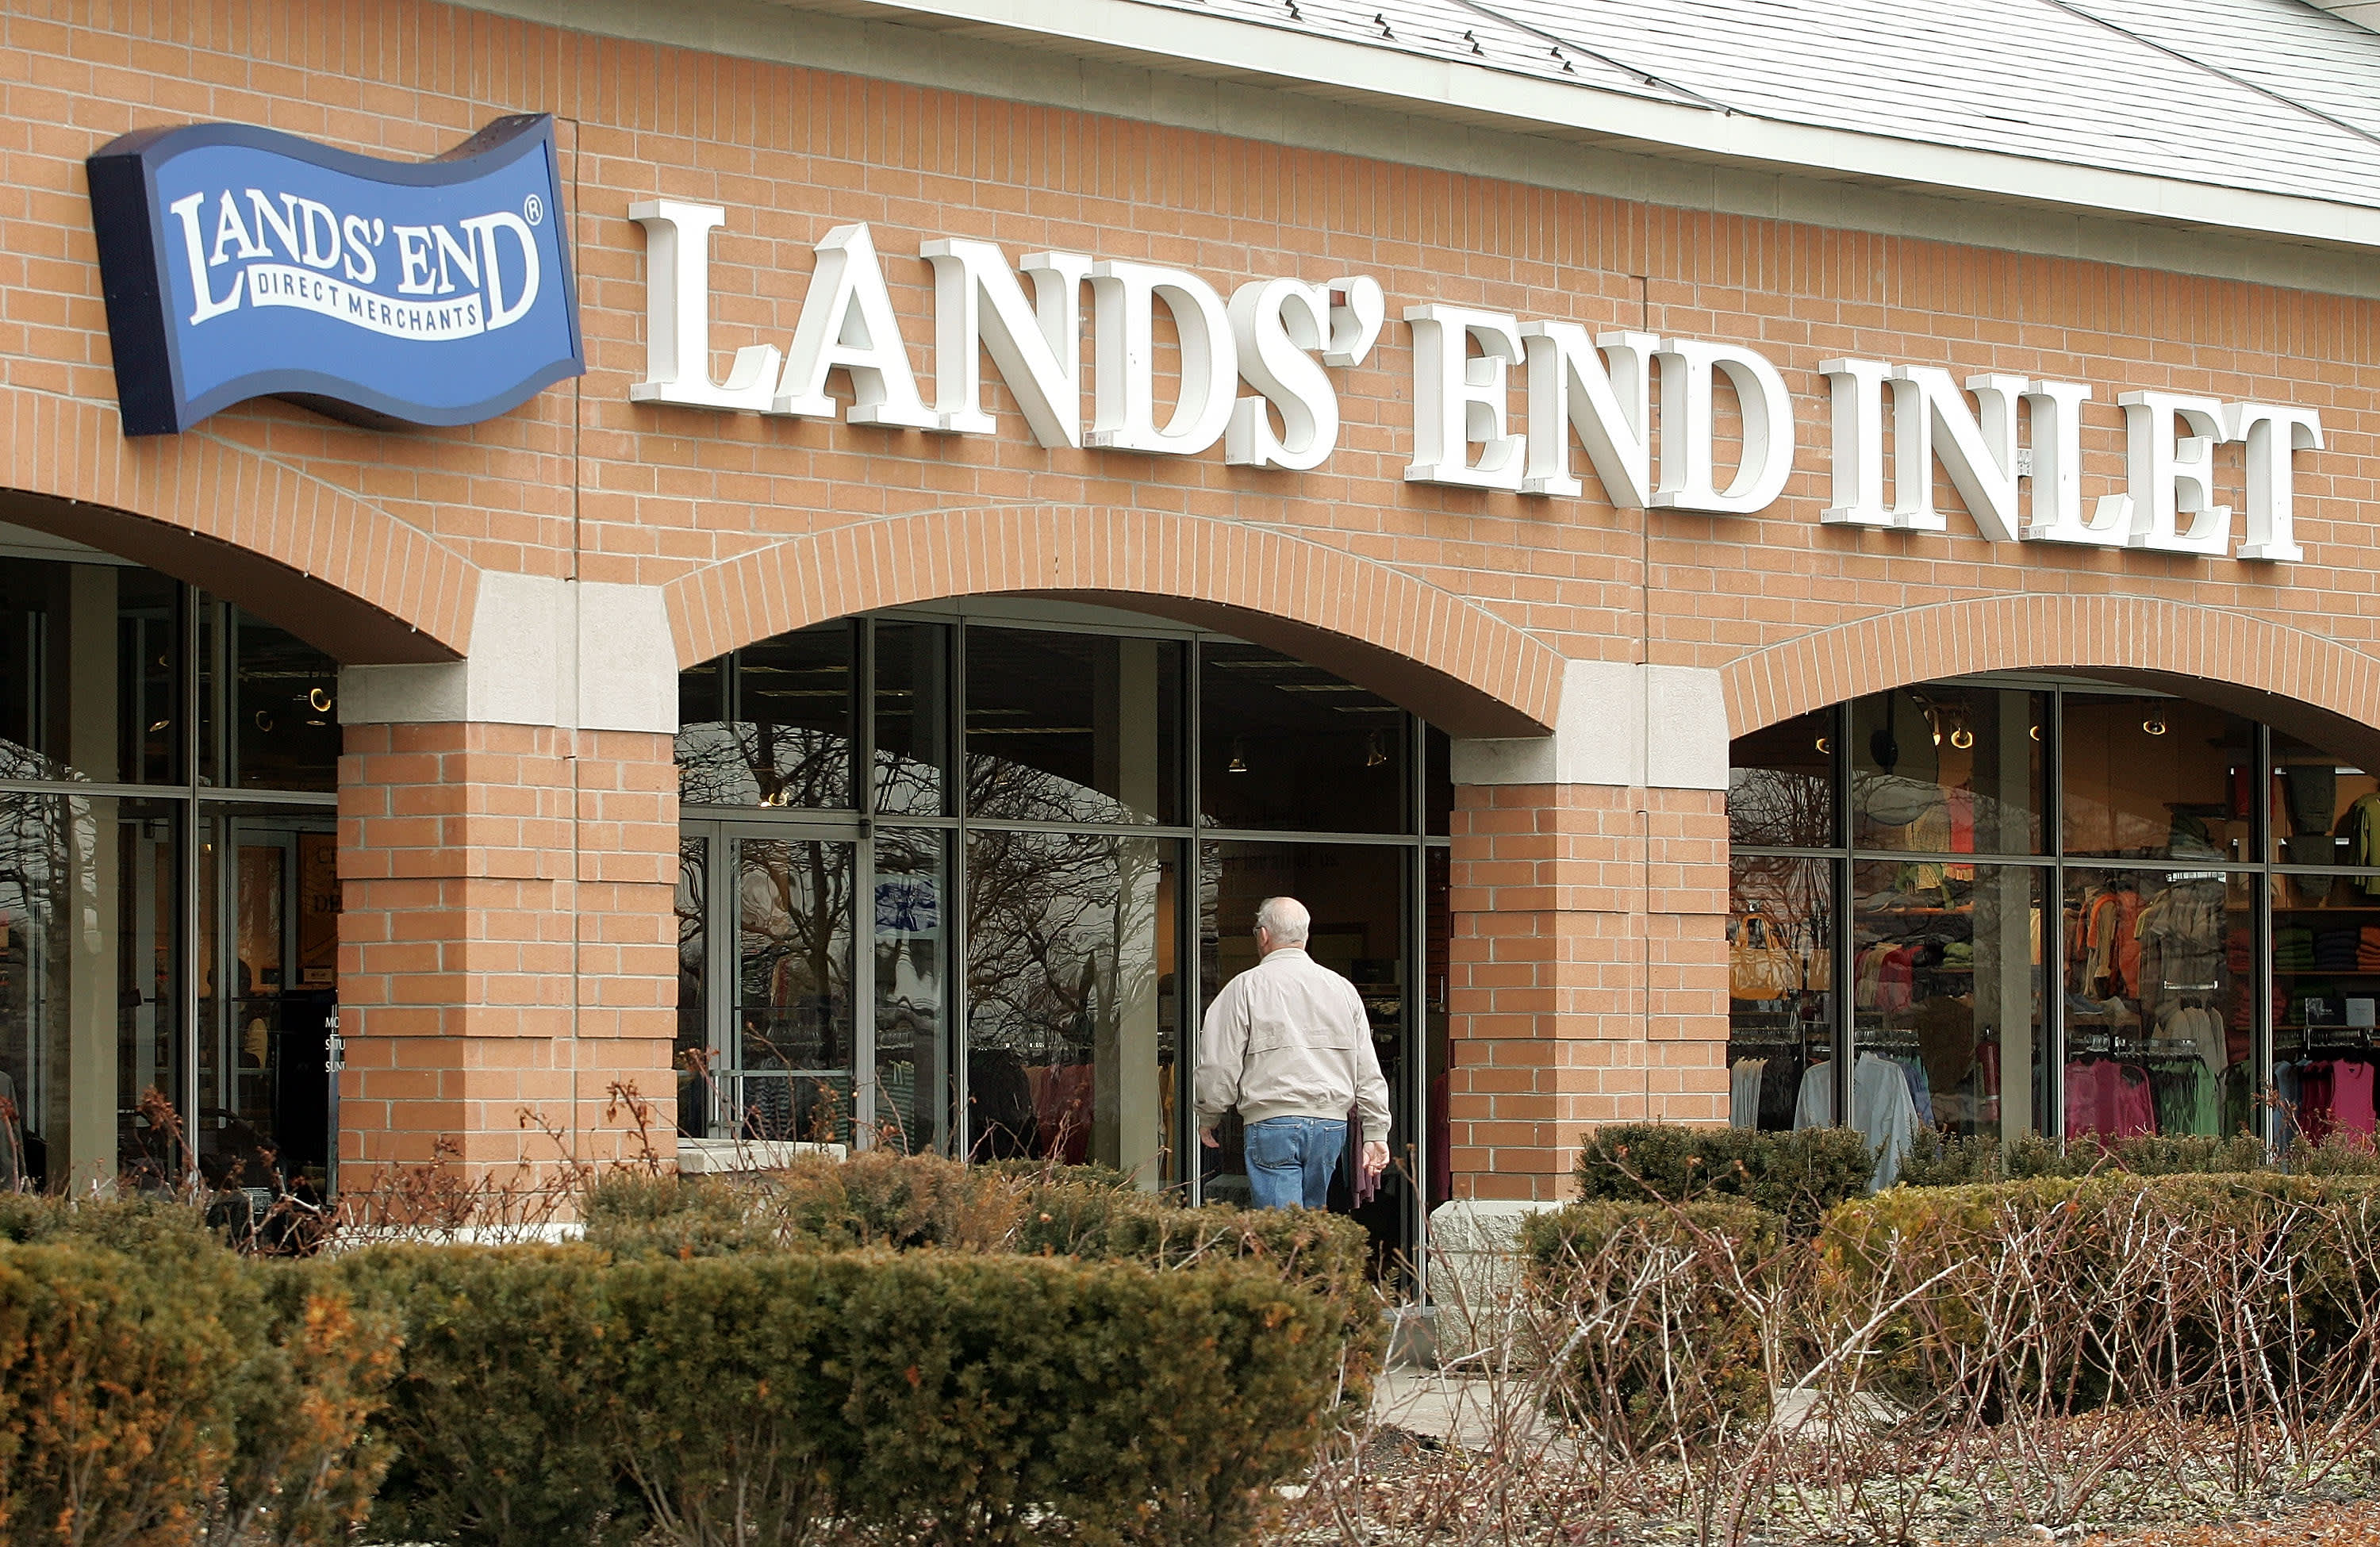 Lands' End CEO says it's difficult to accurately predict the holiday season due to factory delays